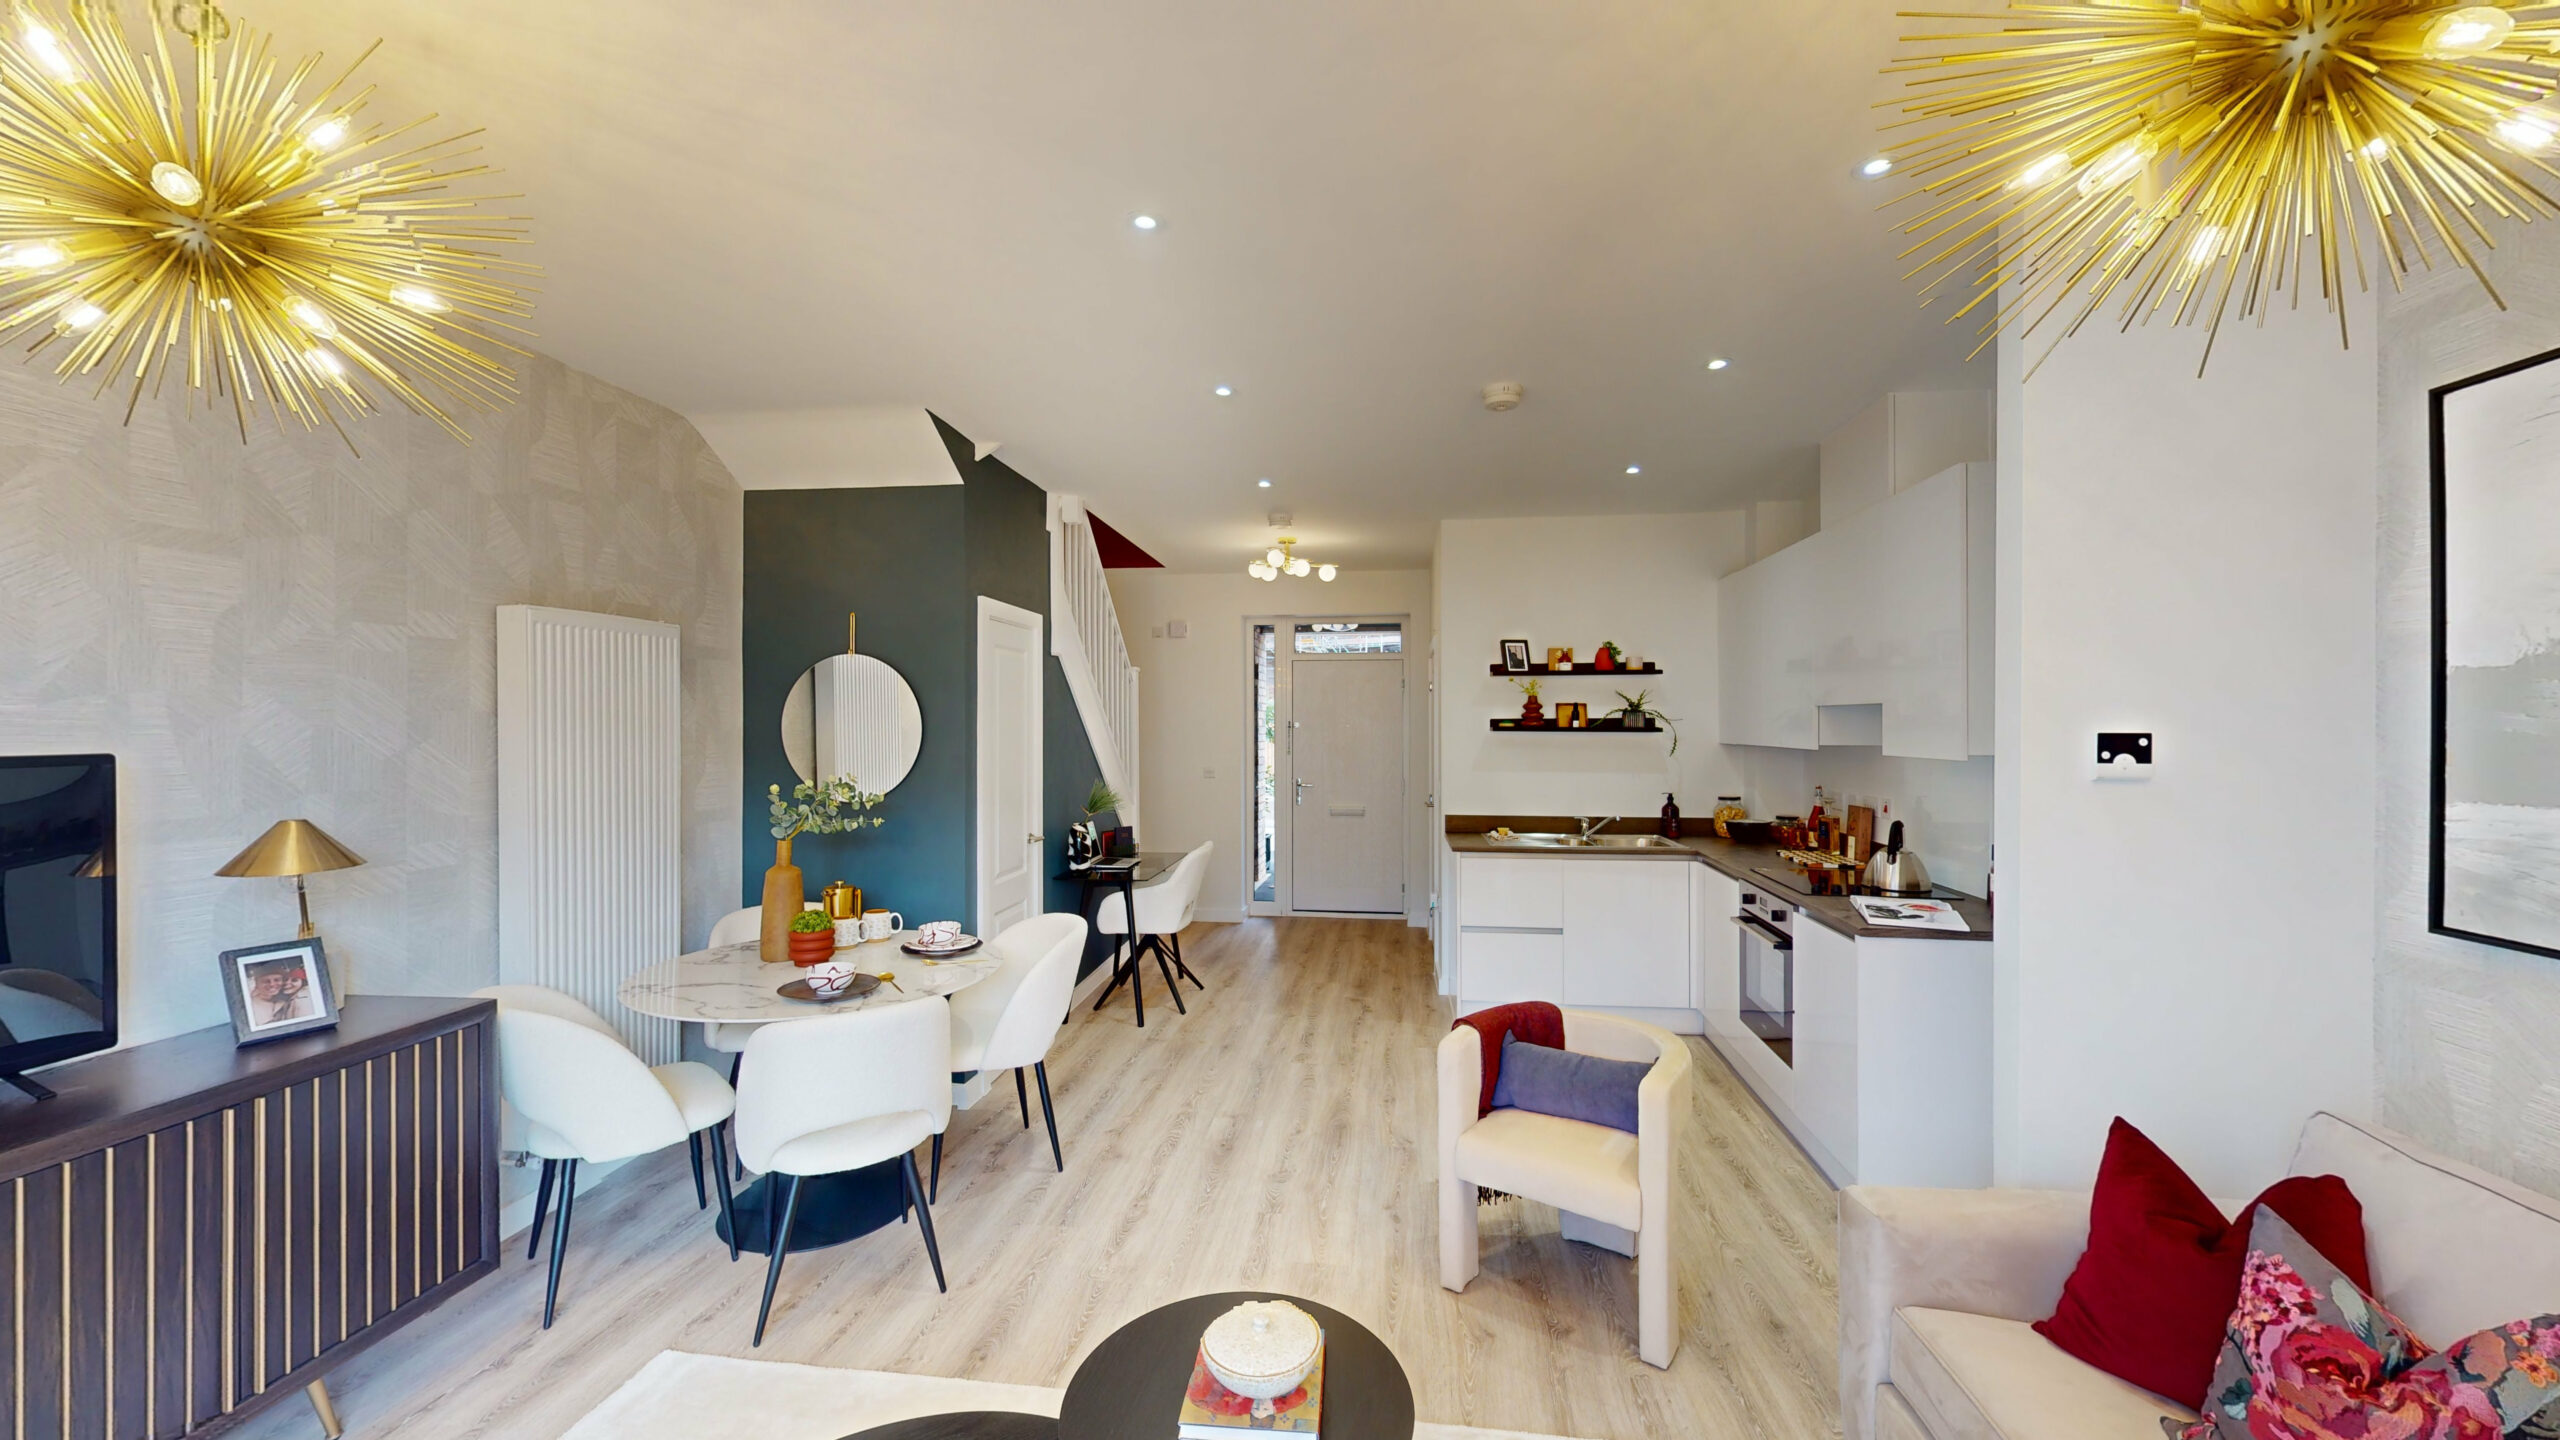 Image of the interior of Belgrave Village development from Connells - available to purchase through Shared Ownership on Share to Buy!